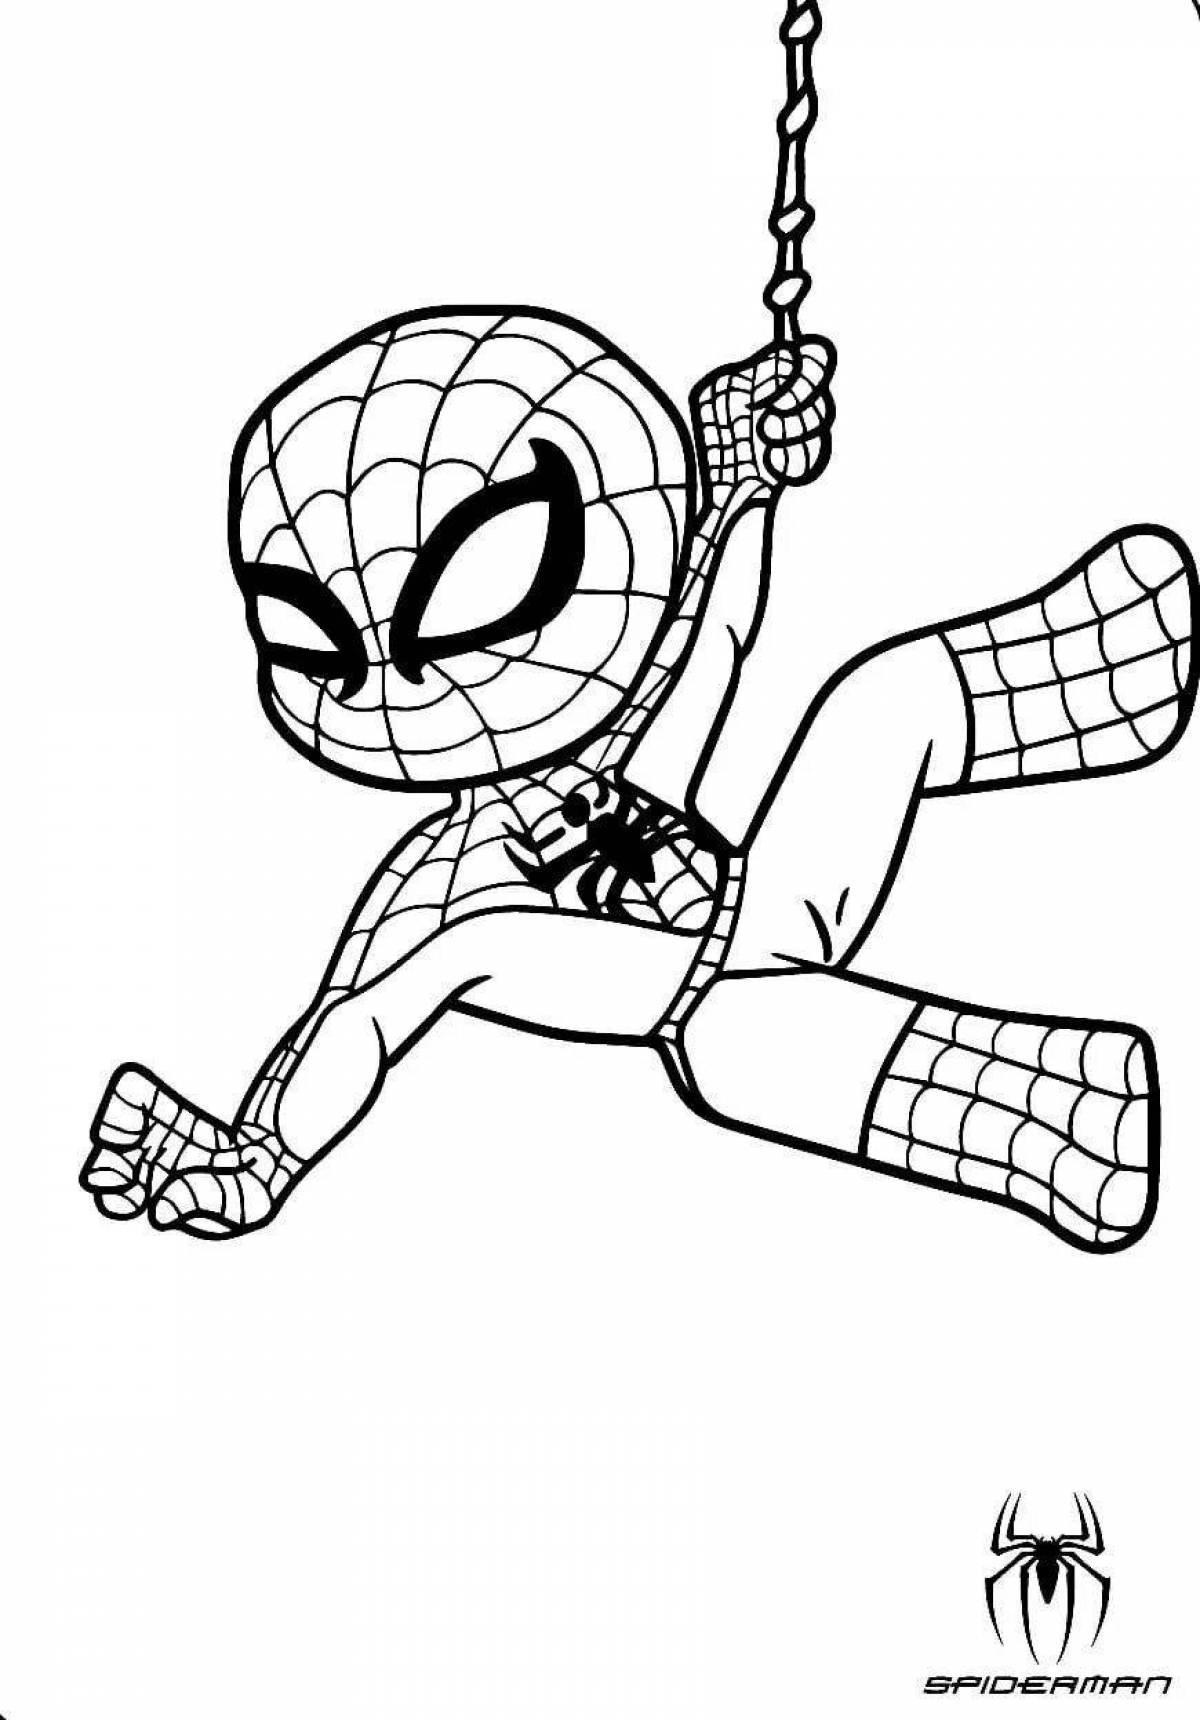 Spider-man bright coloring for kids